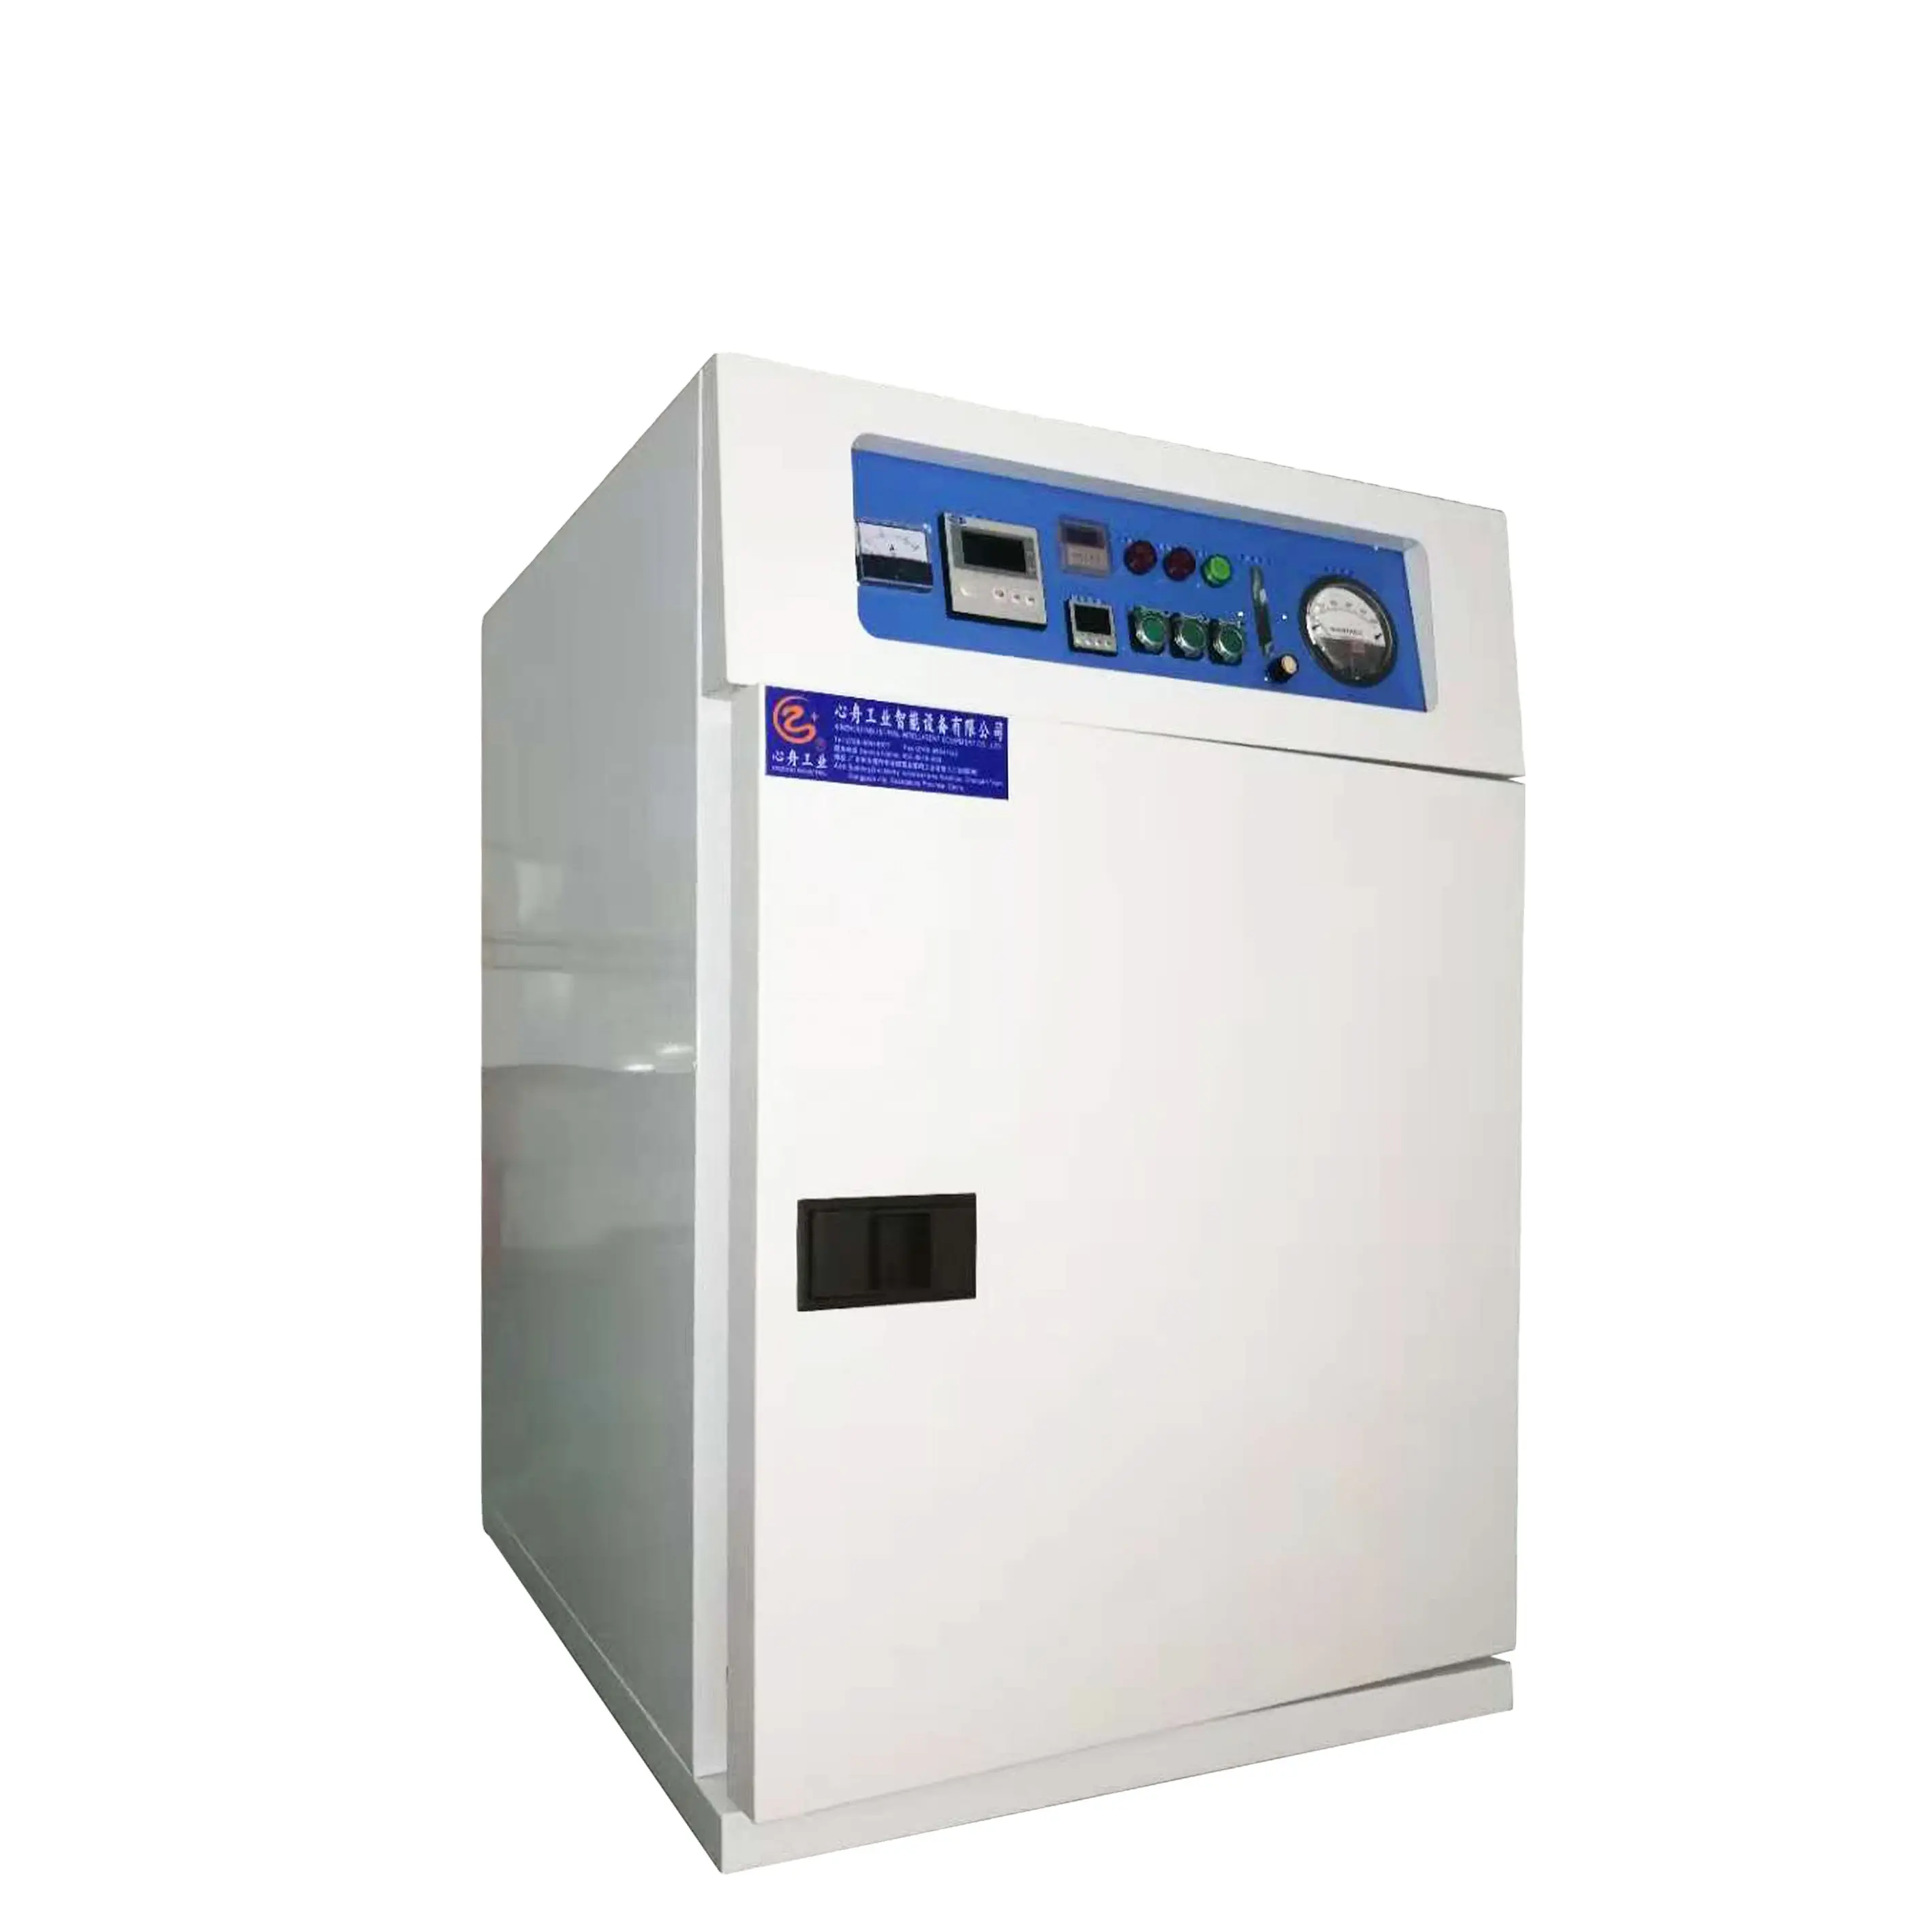 150L Class 100 Electric Heating High Temperature Industrial Dust-free Oven for FPC Flexible Printed Circuit Polyester Film